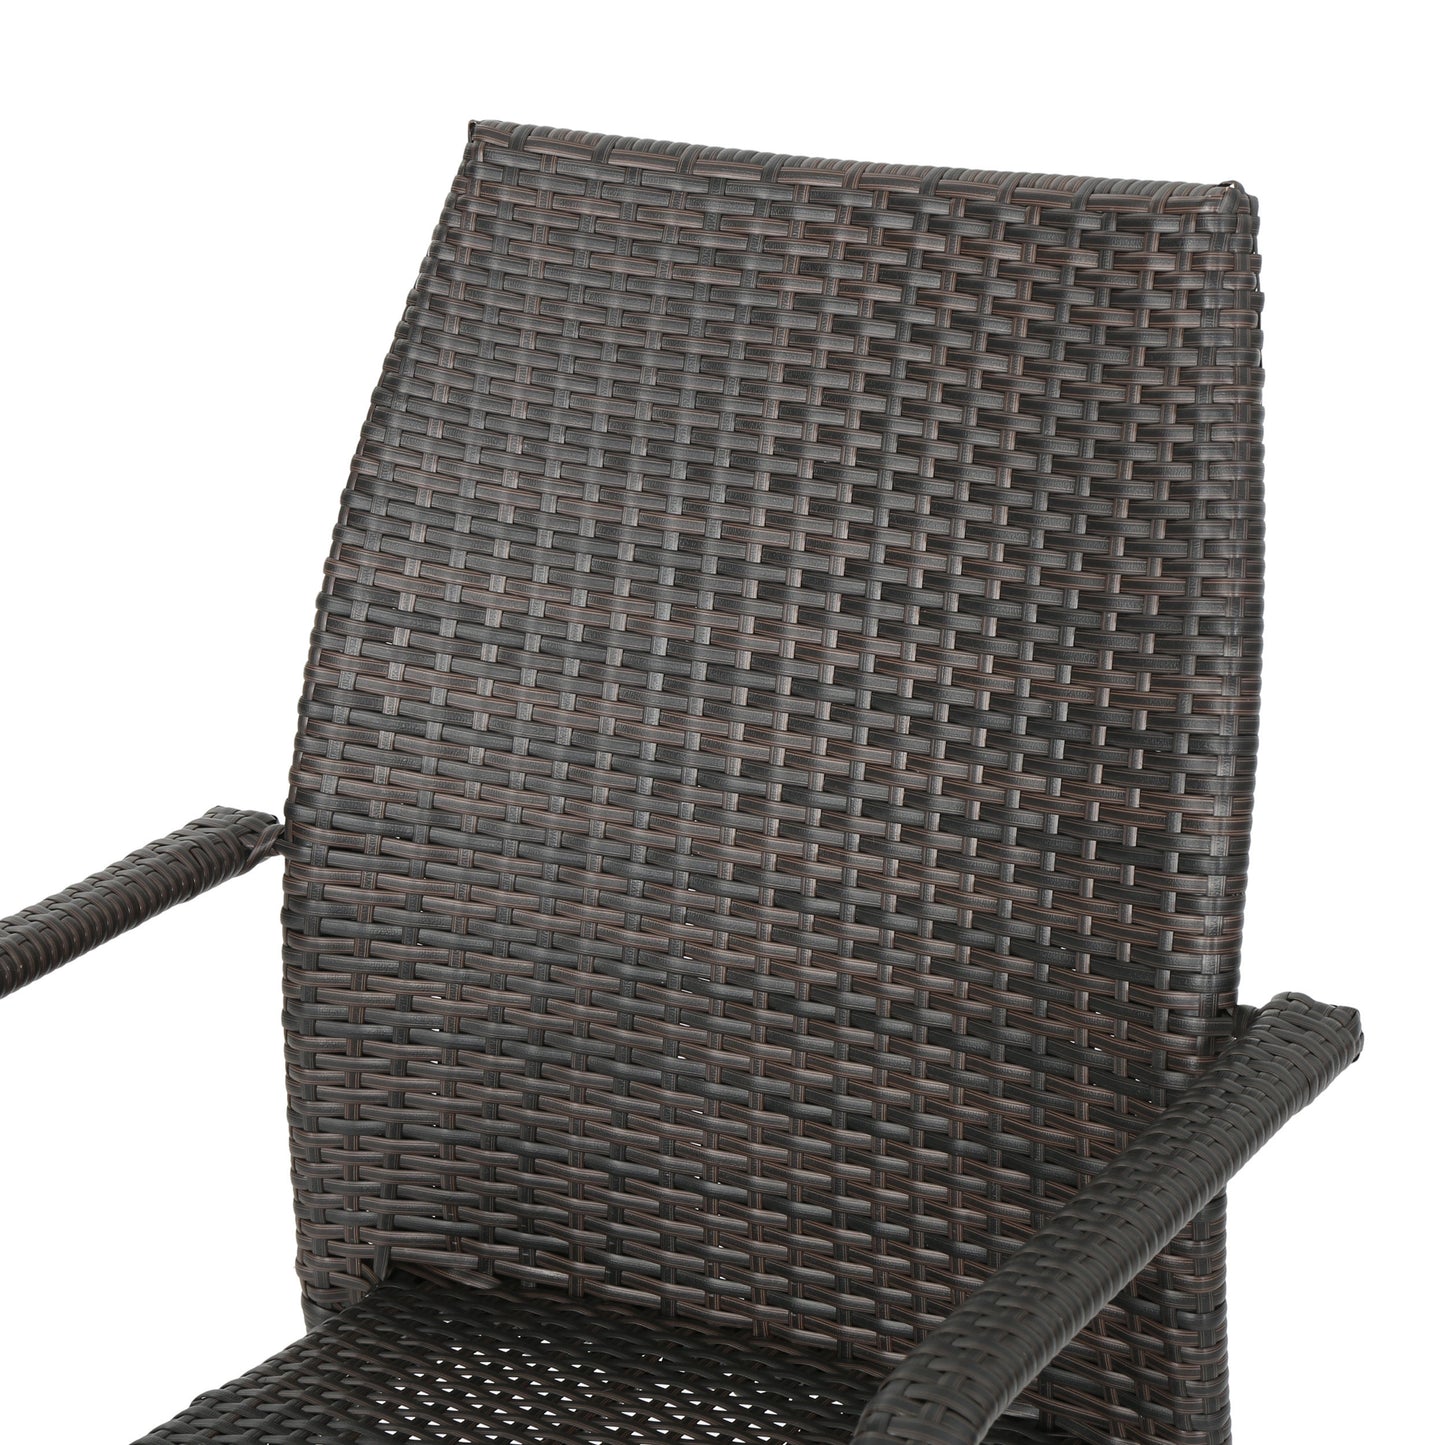 Michael Outdoor 3-Piece Multi-Brown Wicker Bistro Set with Tempered Glass Top